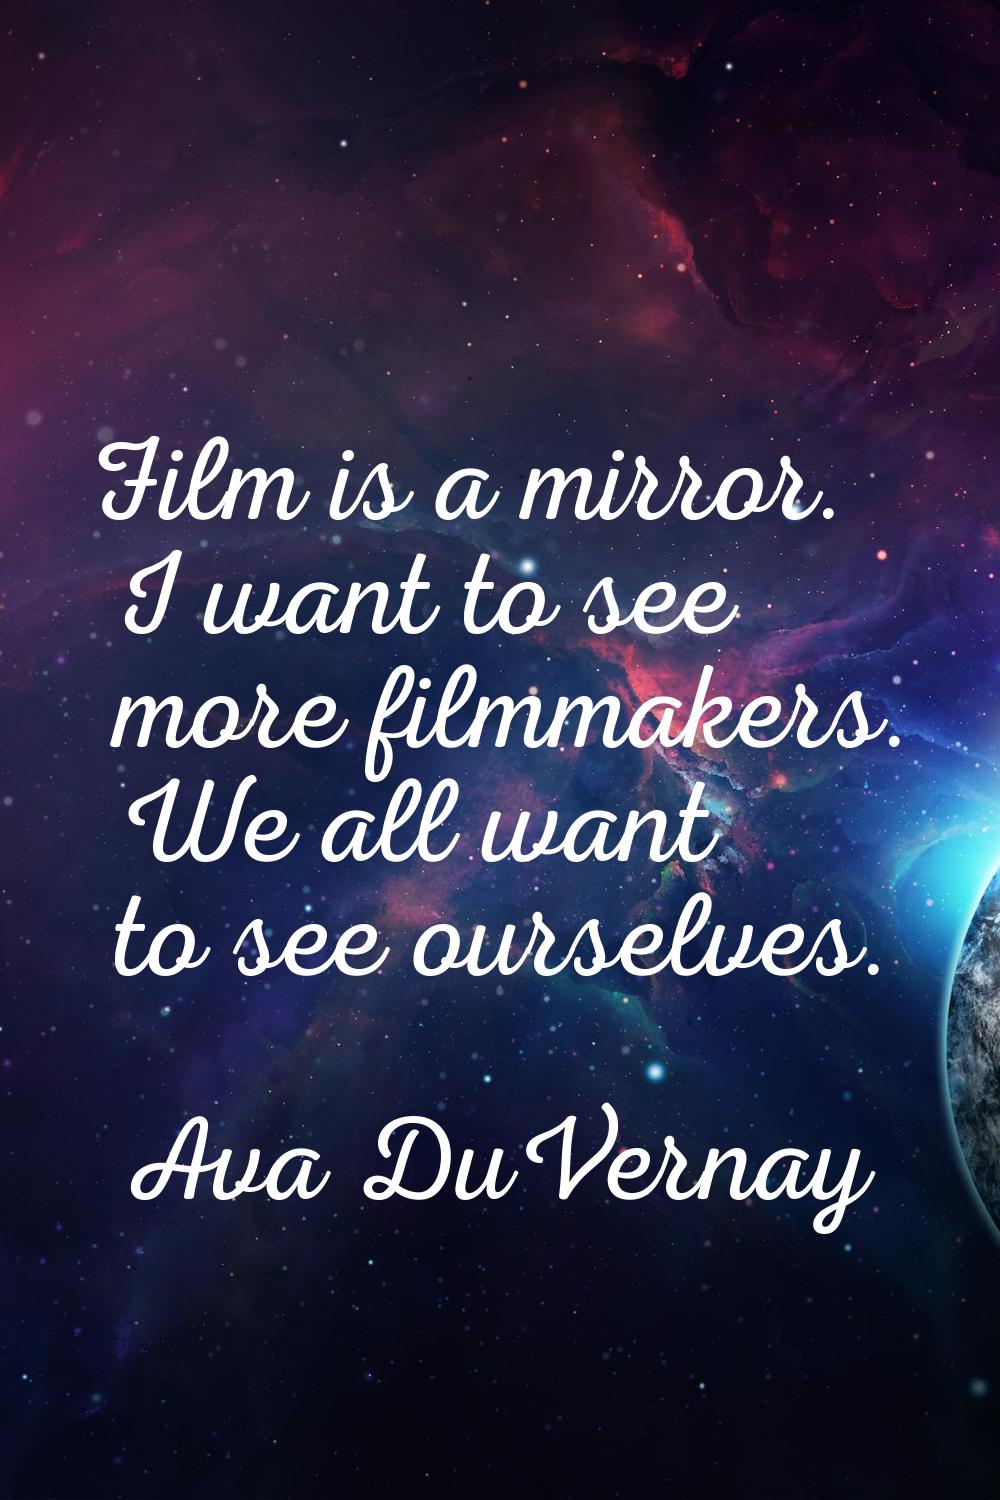 Film is a mirror. I want to see more filmmakers. We all want to see ourselves.